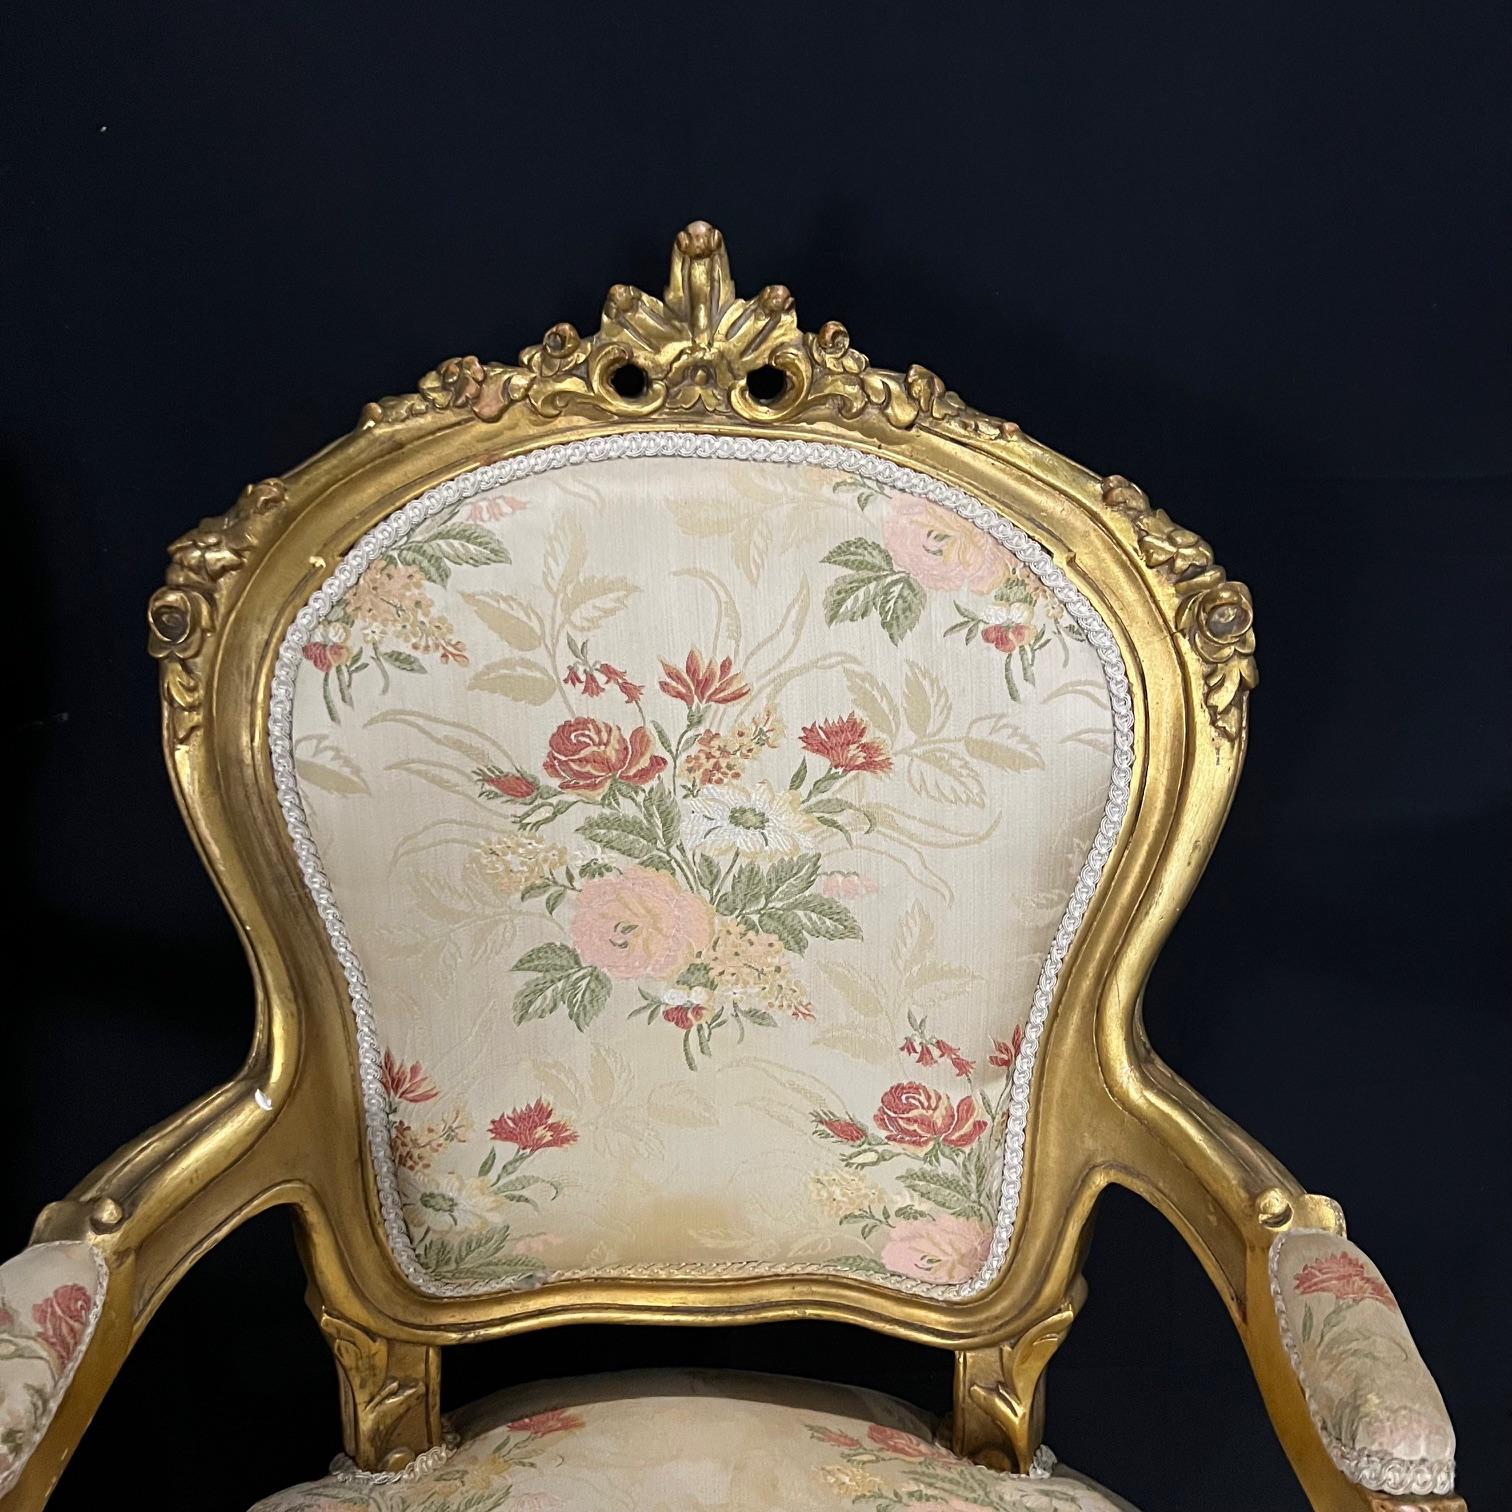 Upholstery Pair of French Louis XV Rococo Giltwood Fauteuil Armchairs